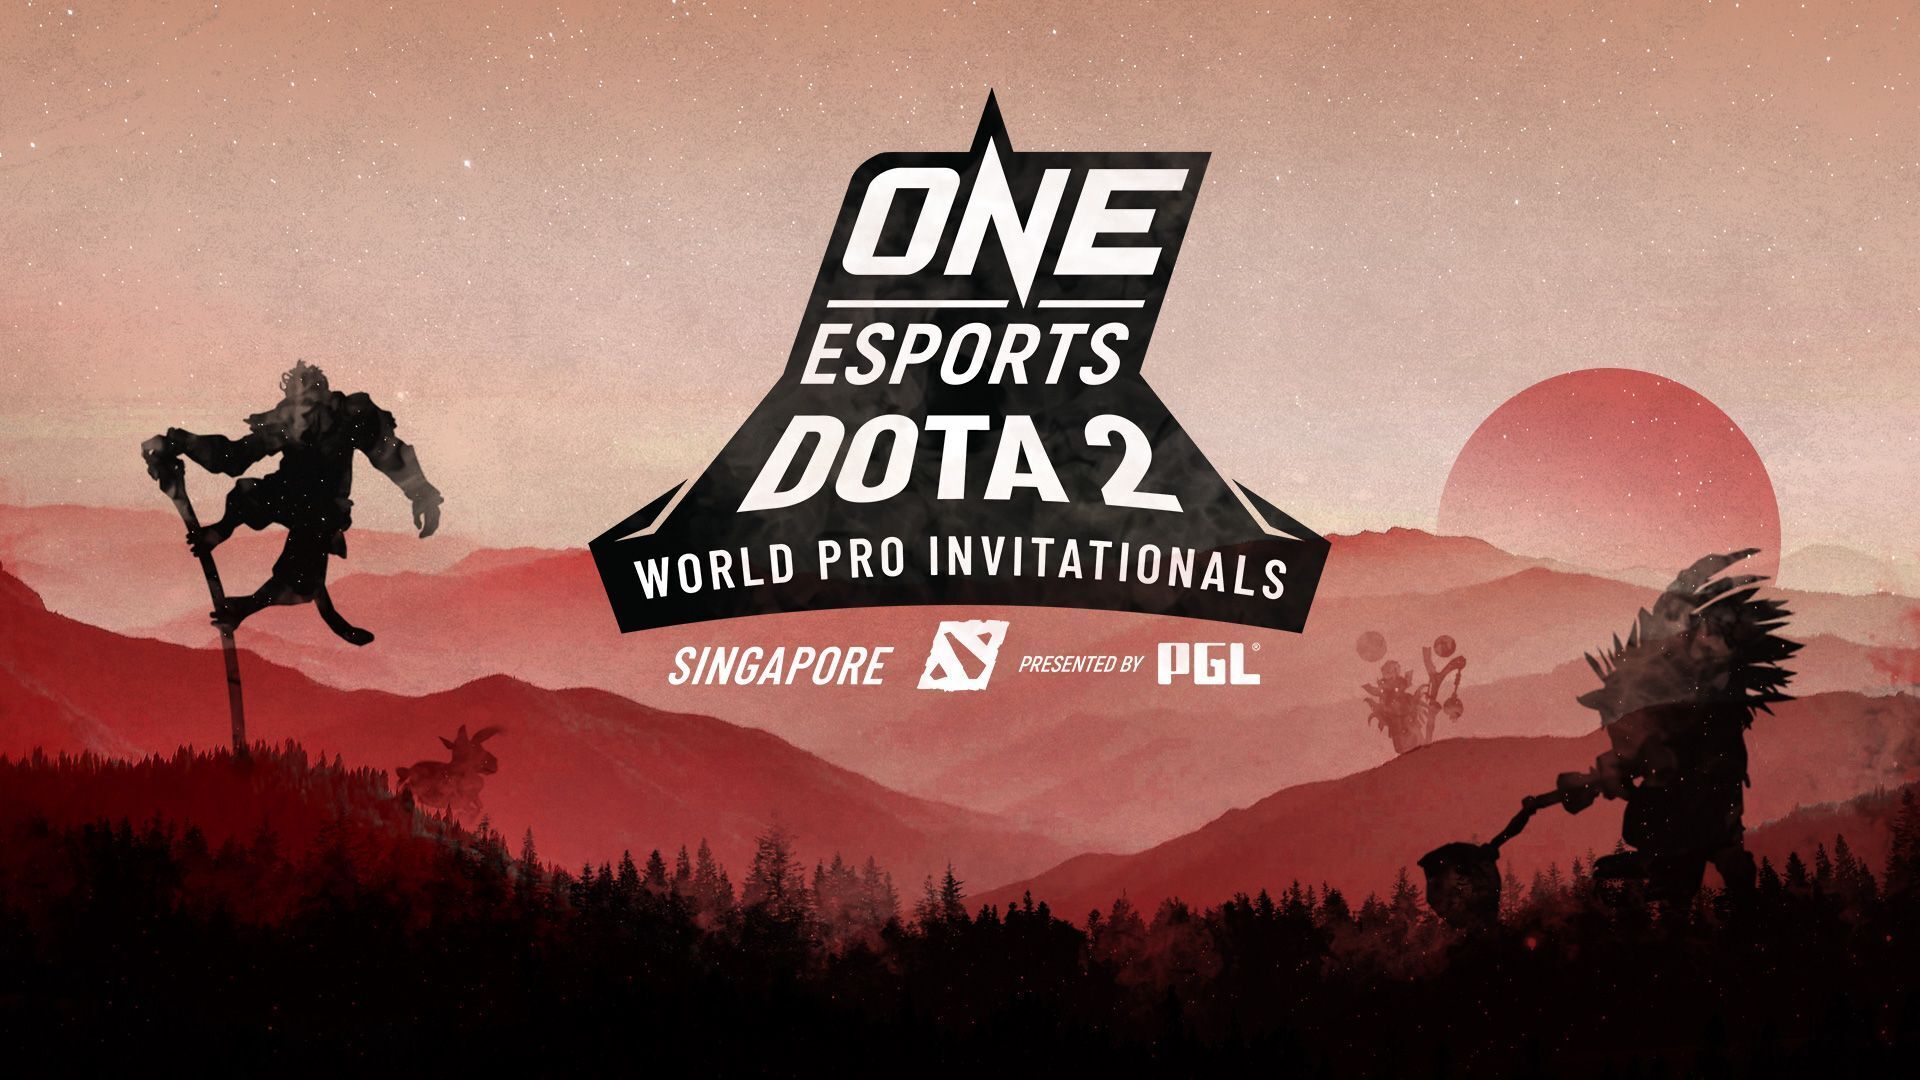 ONE Esports Dota 2 World Pro Invitational Singapore will be the first LAN event played on the 7.23 patch (Image via ONE Esports)